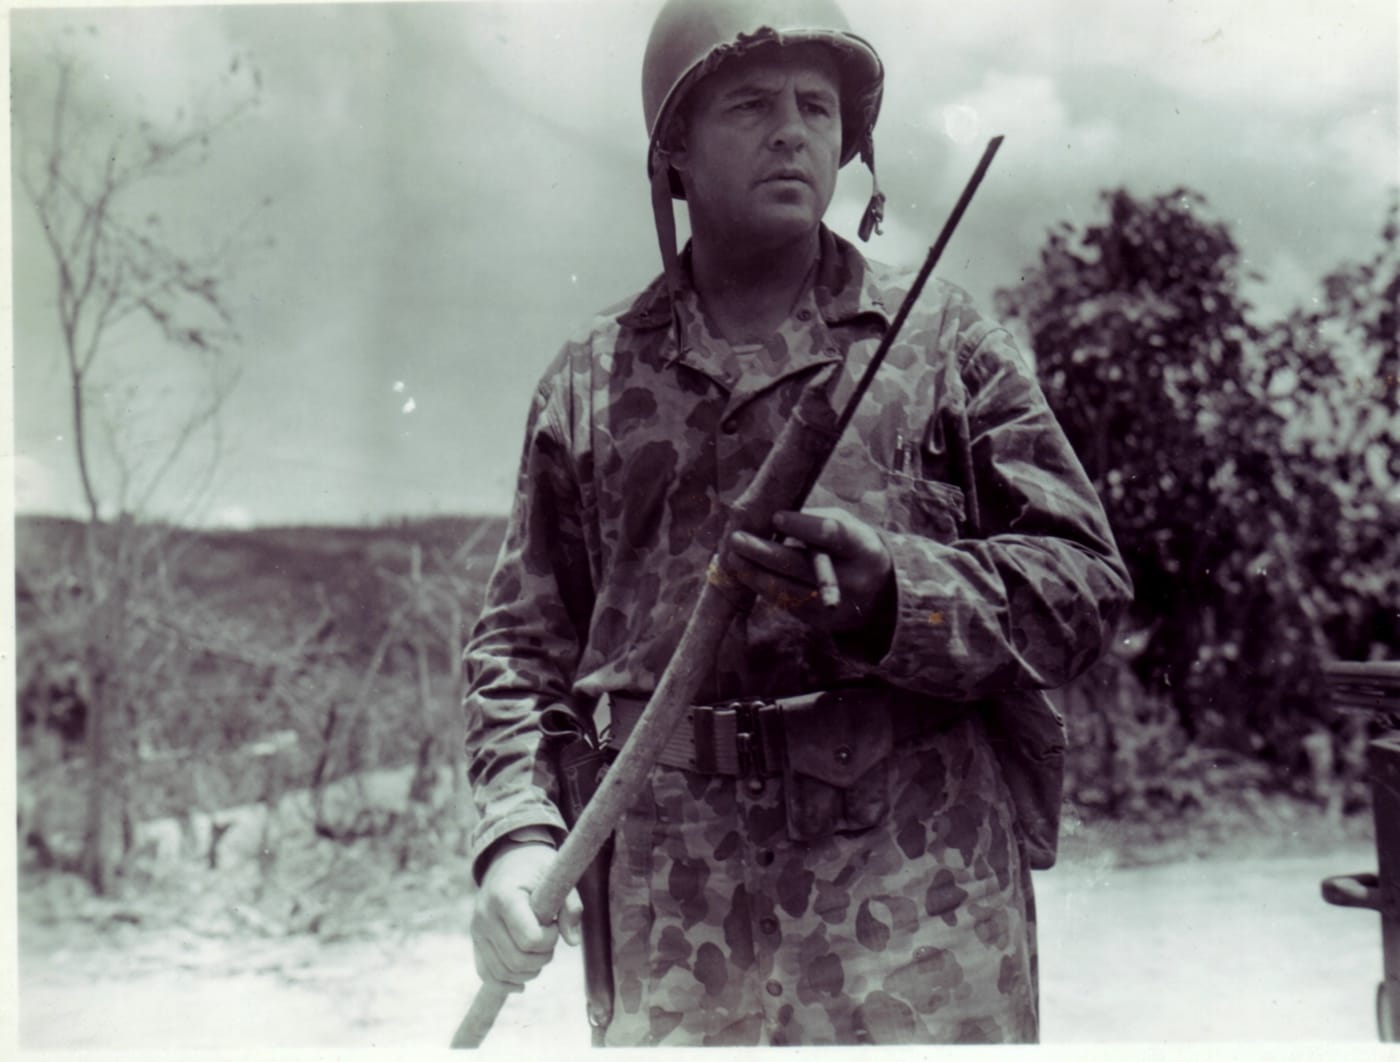 A U. S. Marine in early camouflage inspects a crude Japanese banzai spear recovered on Saipan.